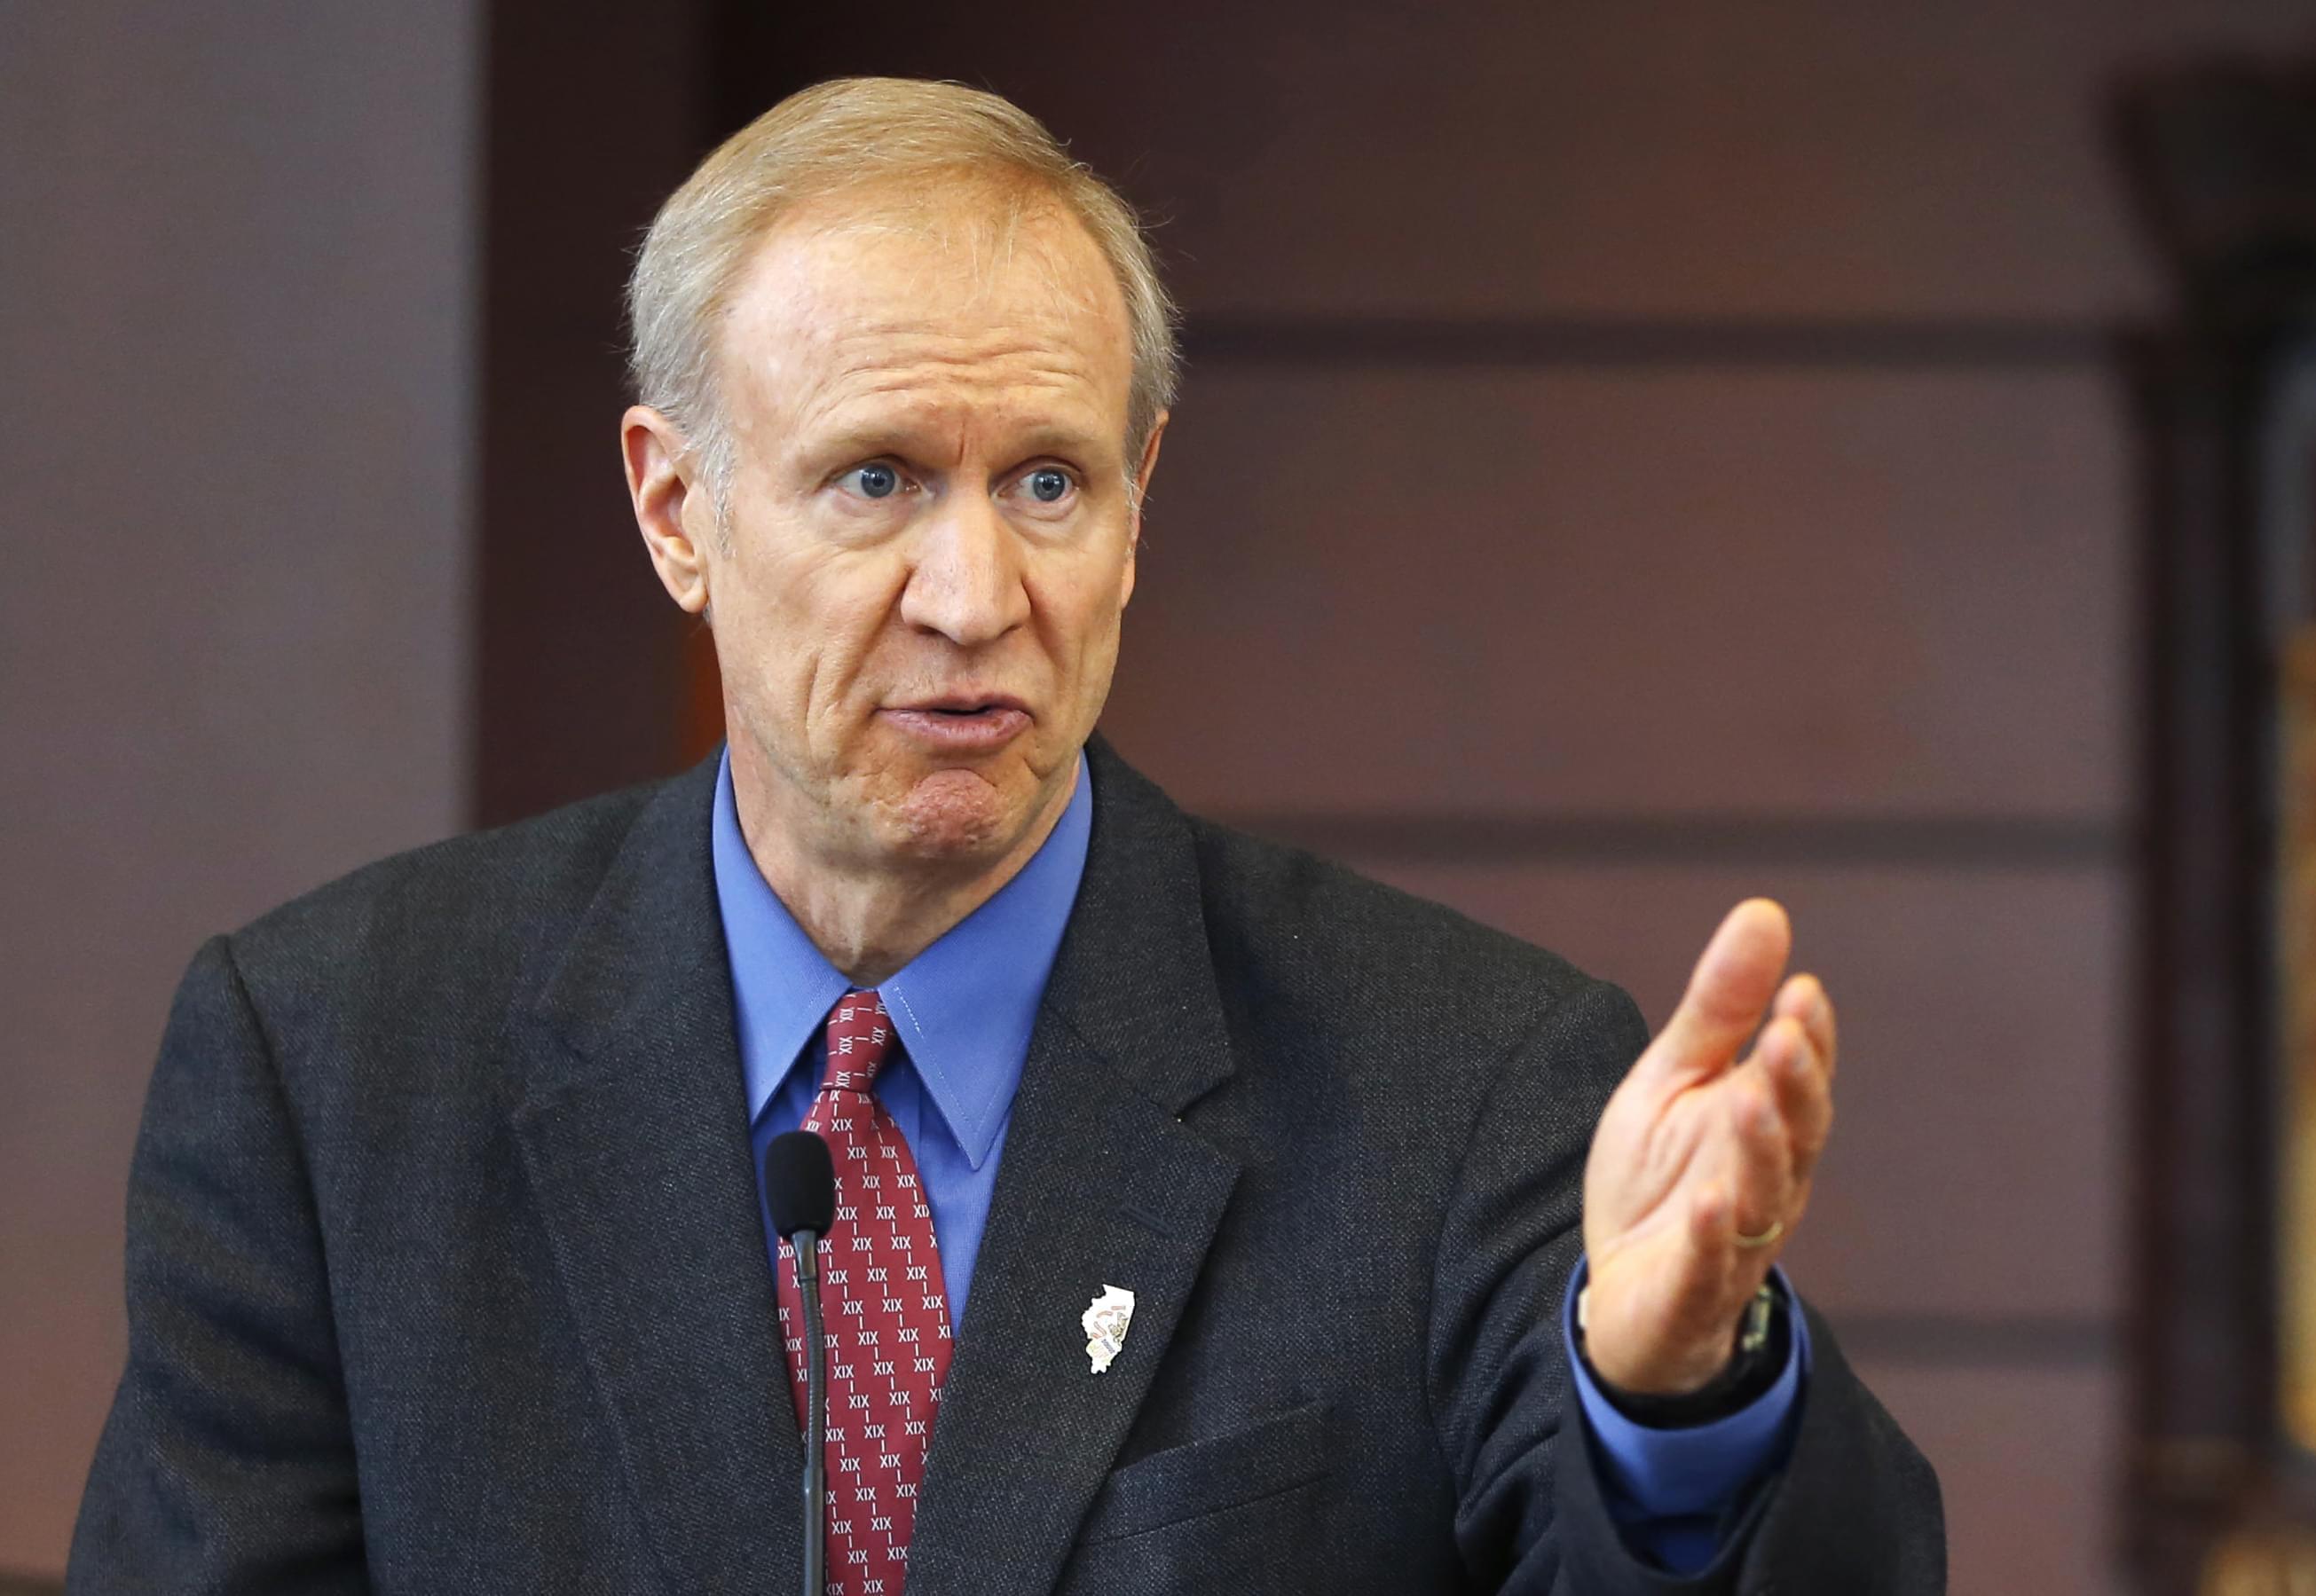 Illinois Gov. Bruce Rauner speaks at a news conference in Chicago. A bipartisan agreement to plug a $1.6 billion budget hole including more than $1.3 billion in fund transfers from a variety of sources to avert shutdowns of Illinois state programs an